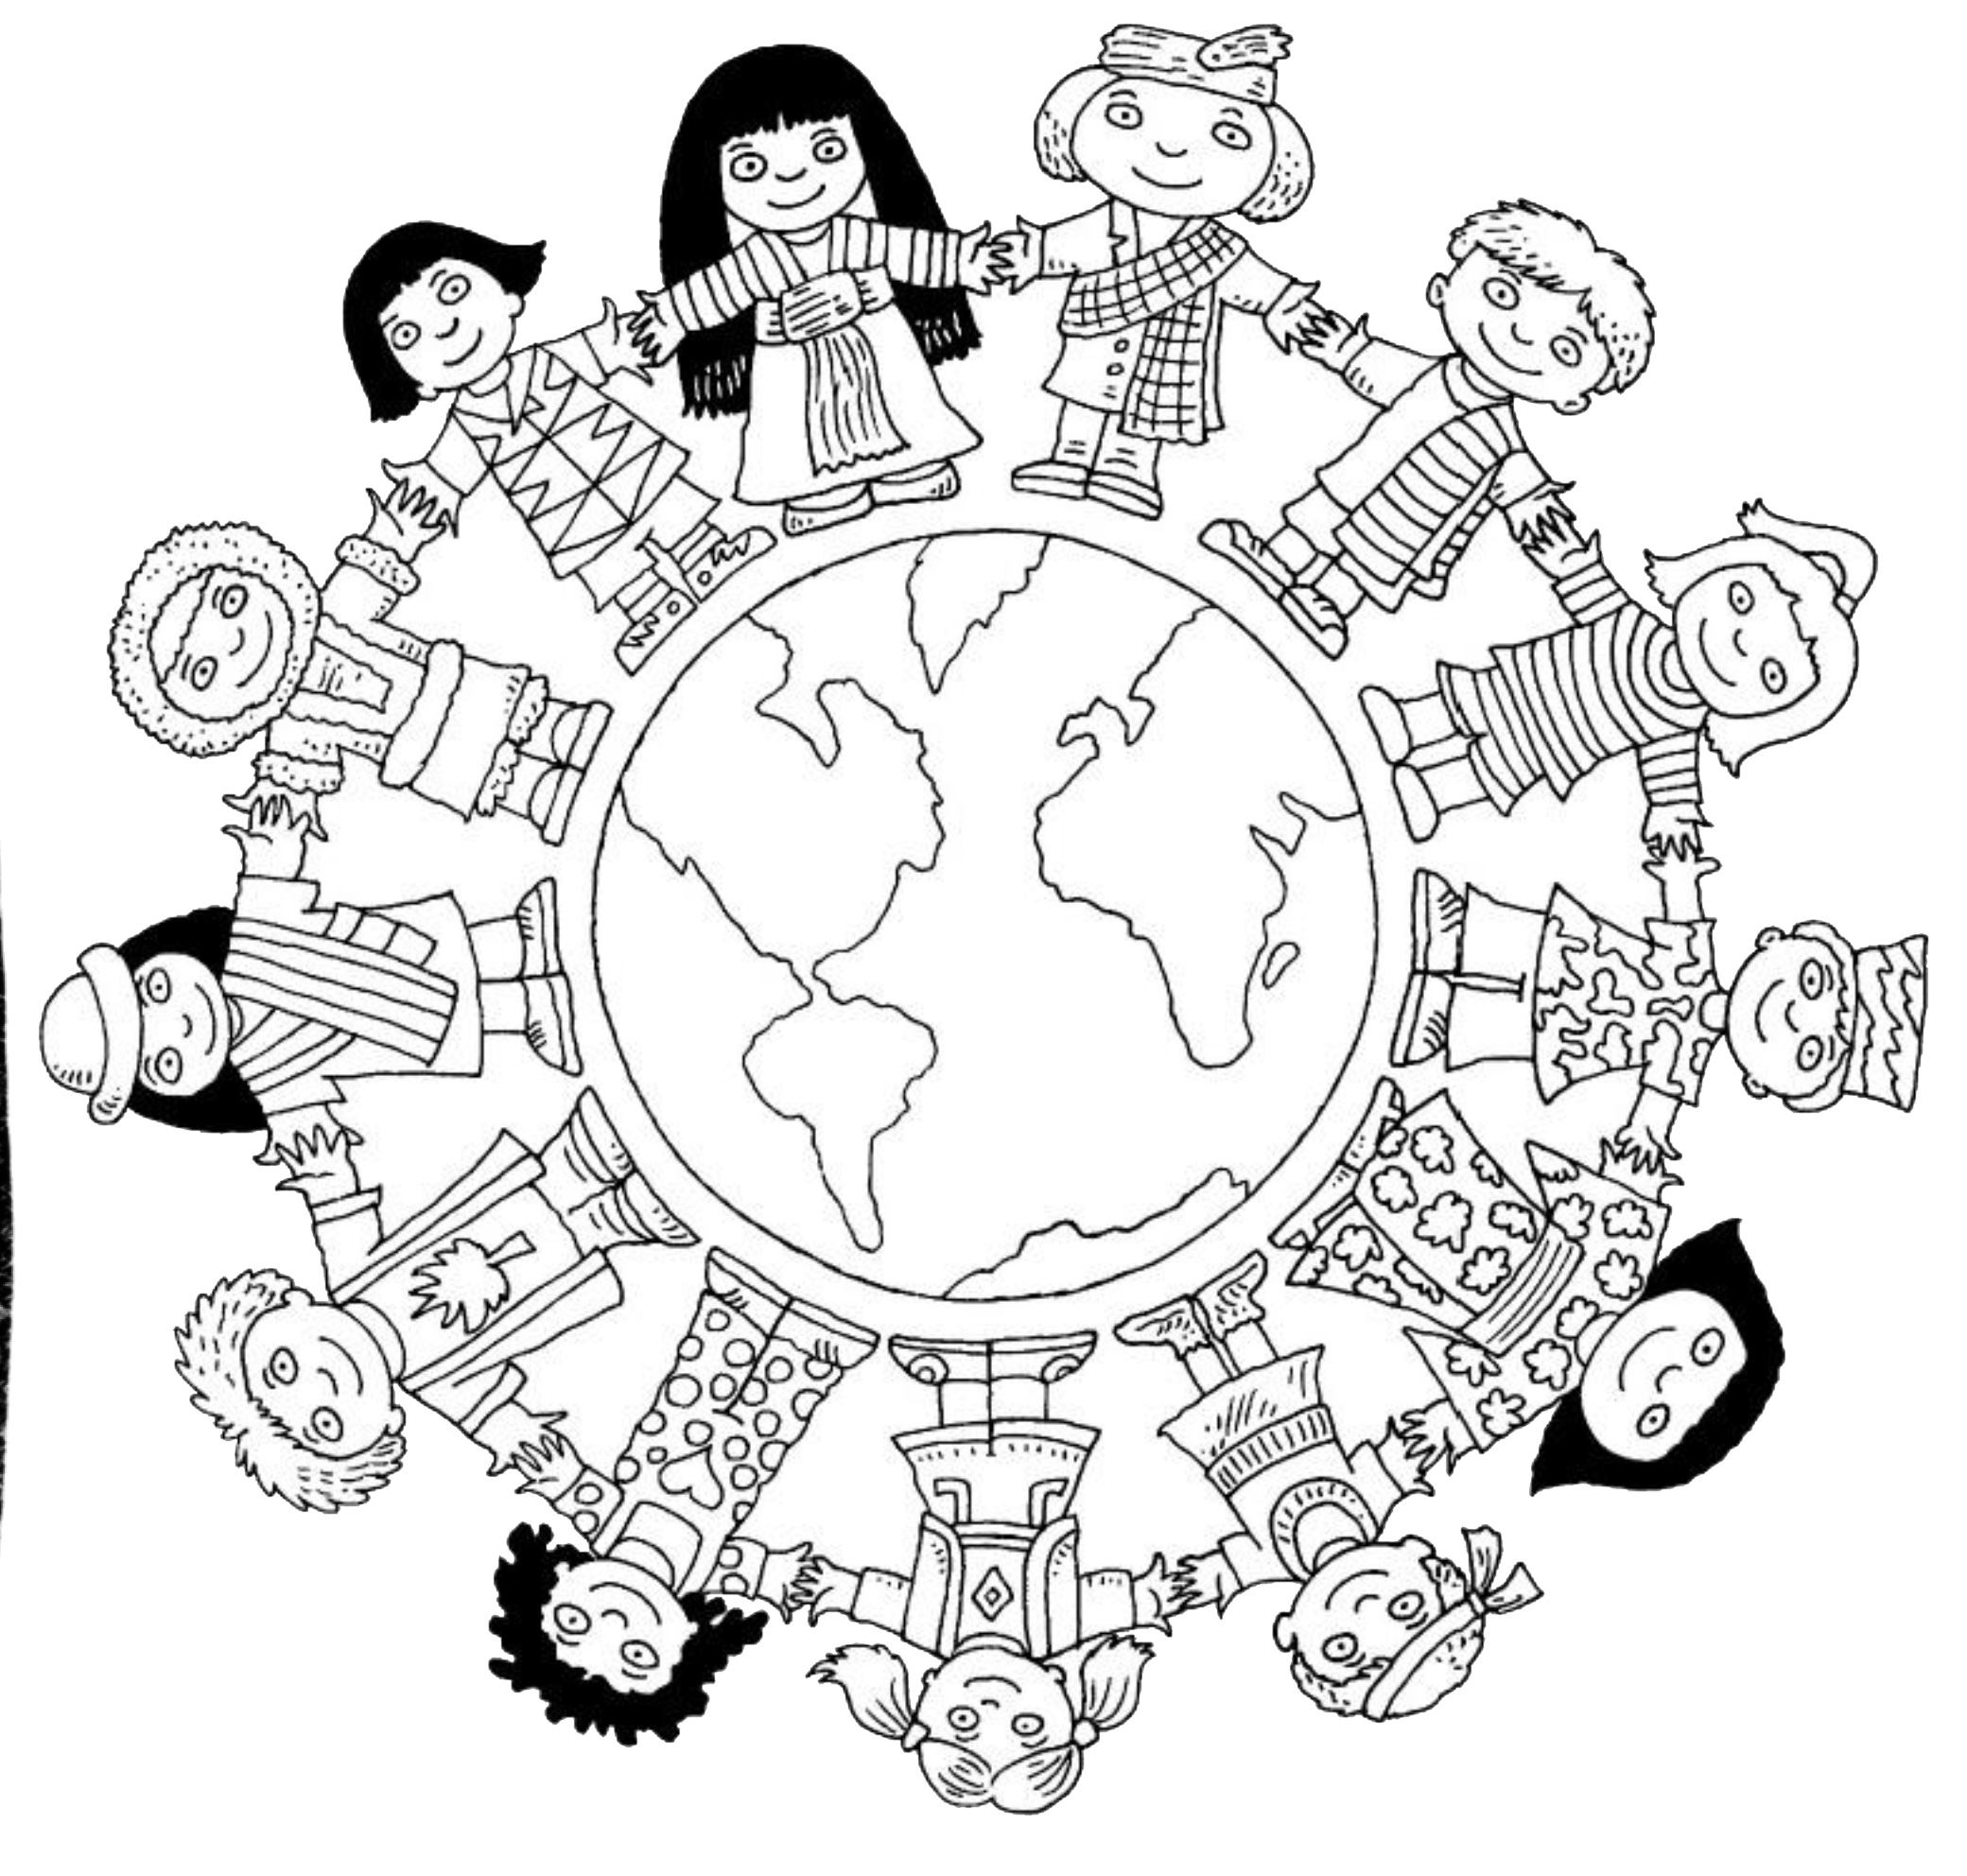 Children Around The World Coloring Pages to download and ...